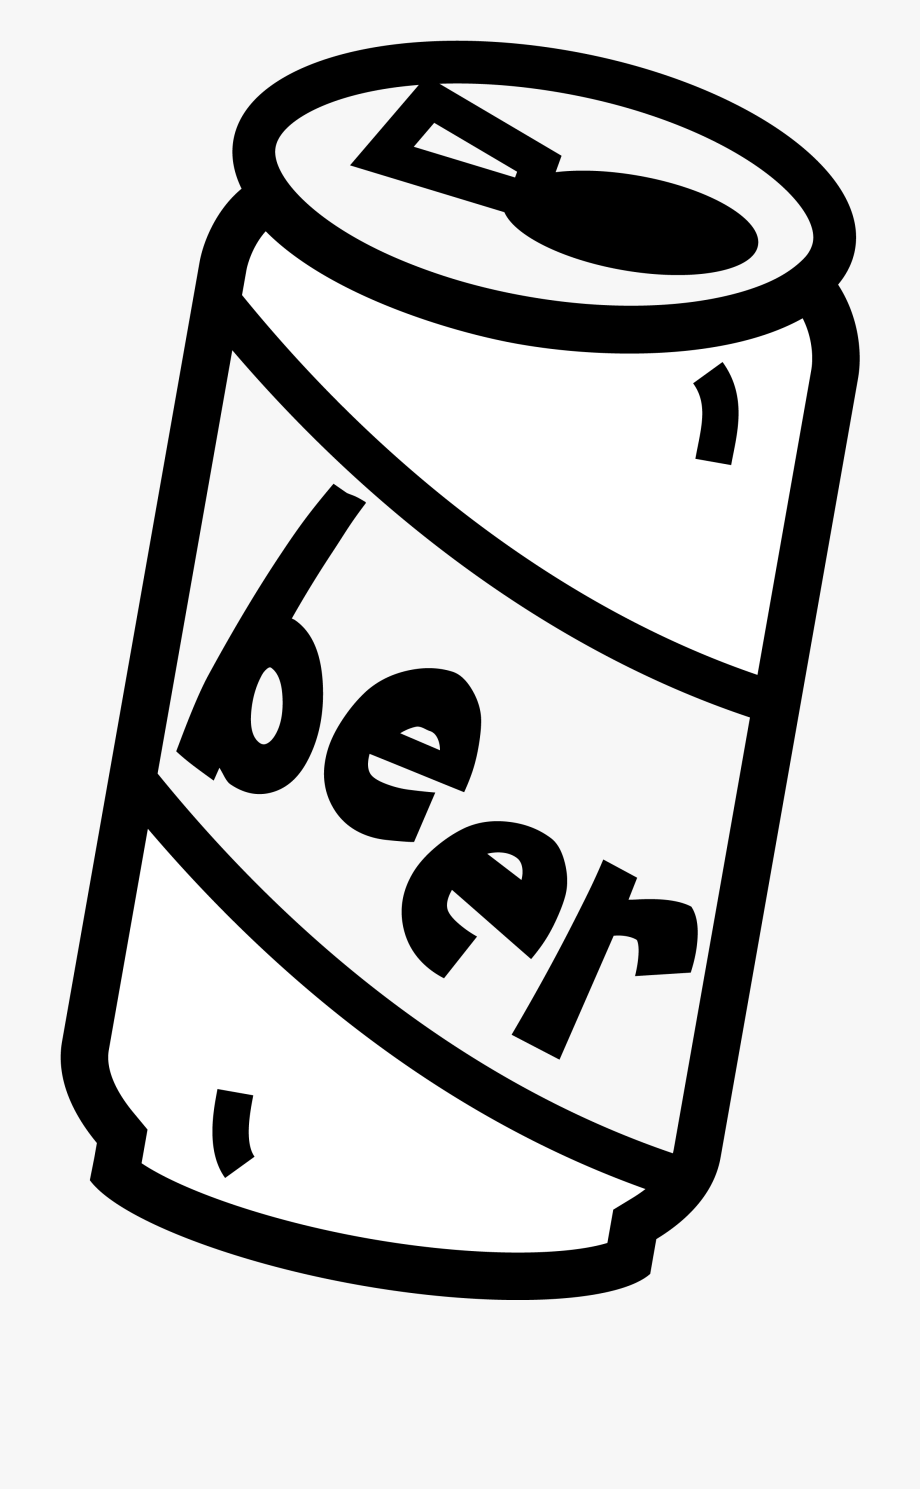 Beer clipart beer can, Beer beer can Transparent FREE for download on